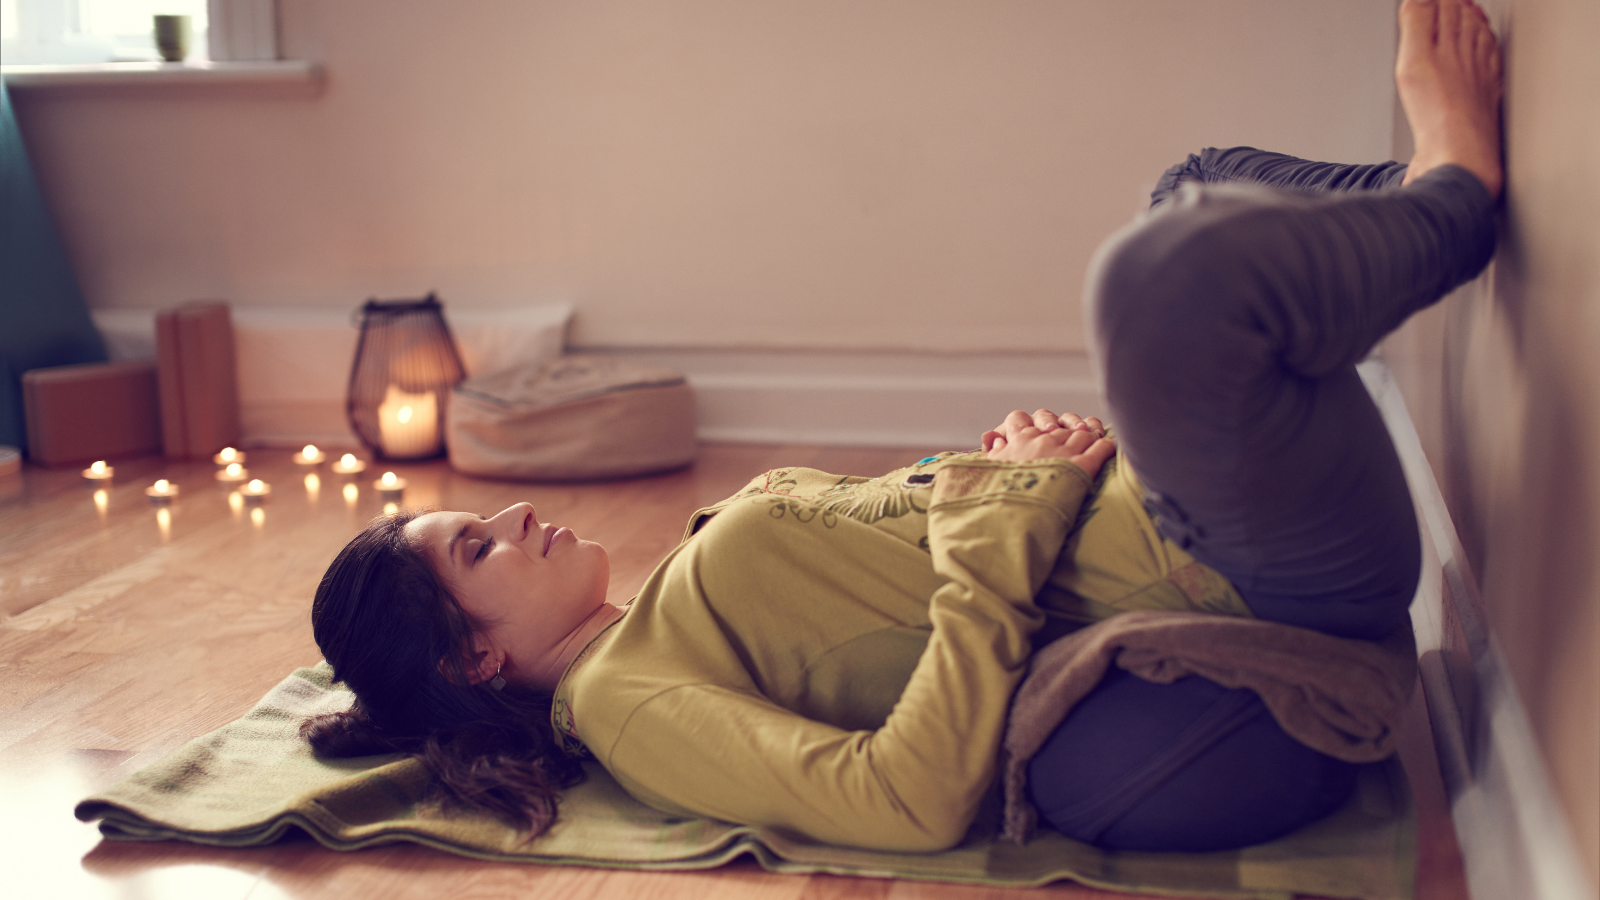 Restorative Yoga is an activity that will help prepare your body for sleep and rest with no to minimal nighttime light